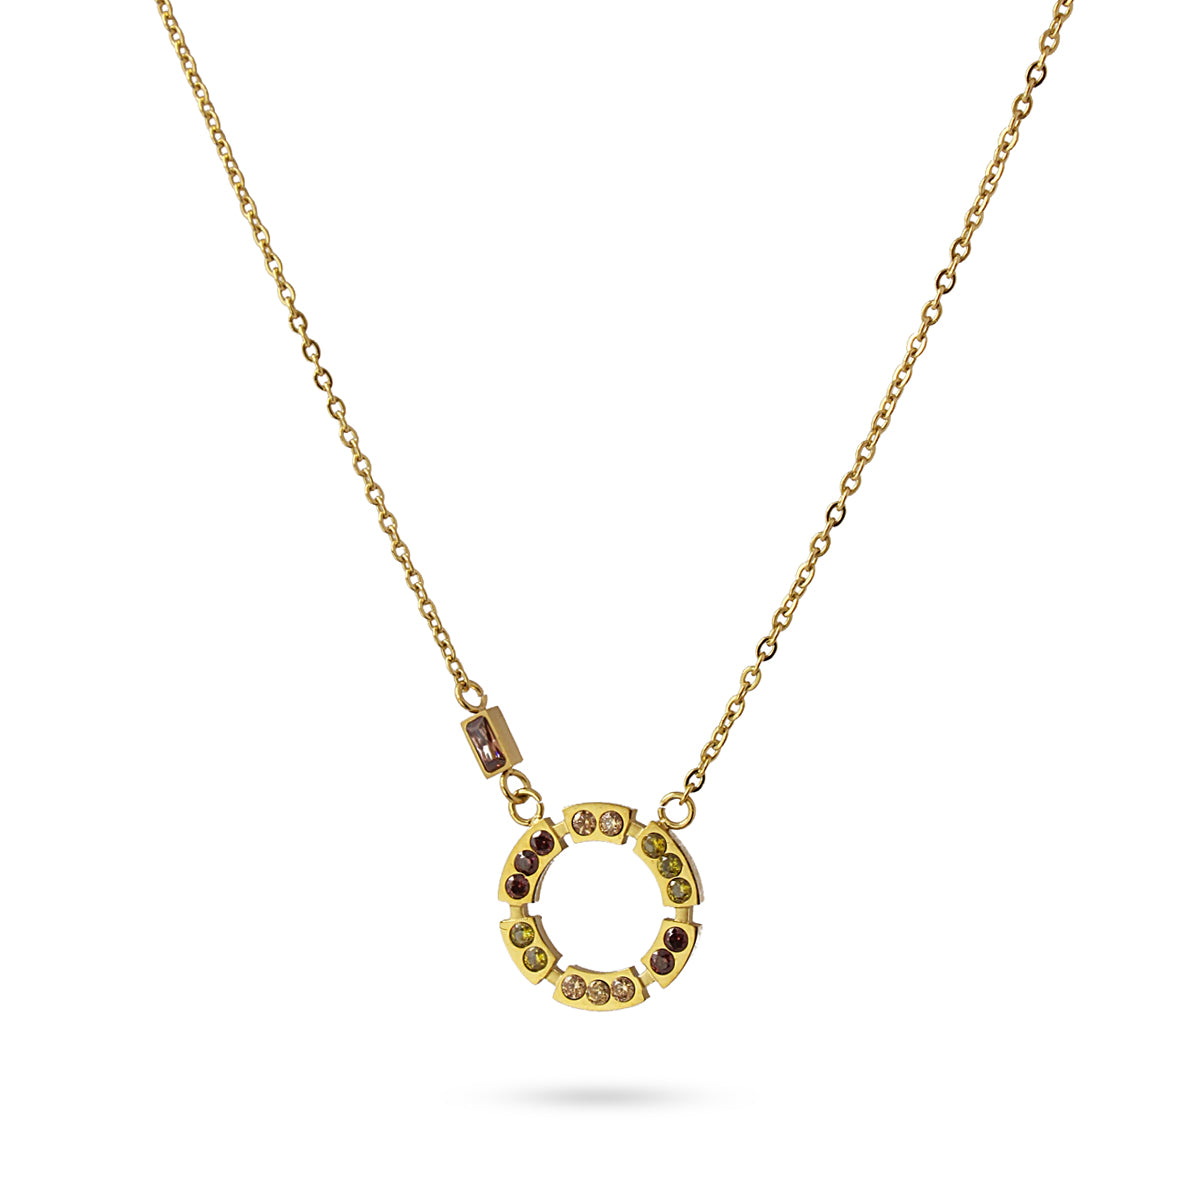 CZ NECKLACE WITH ROUND PENDANT